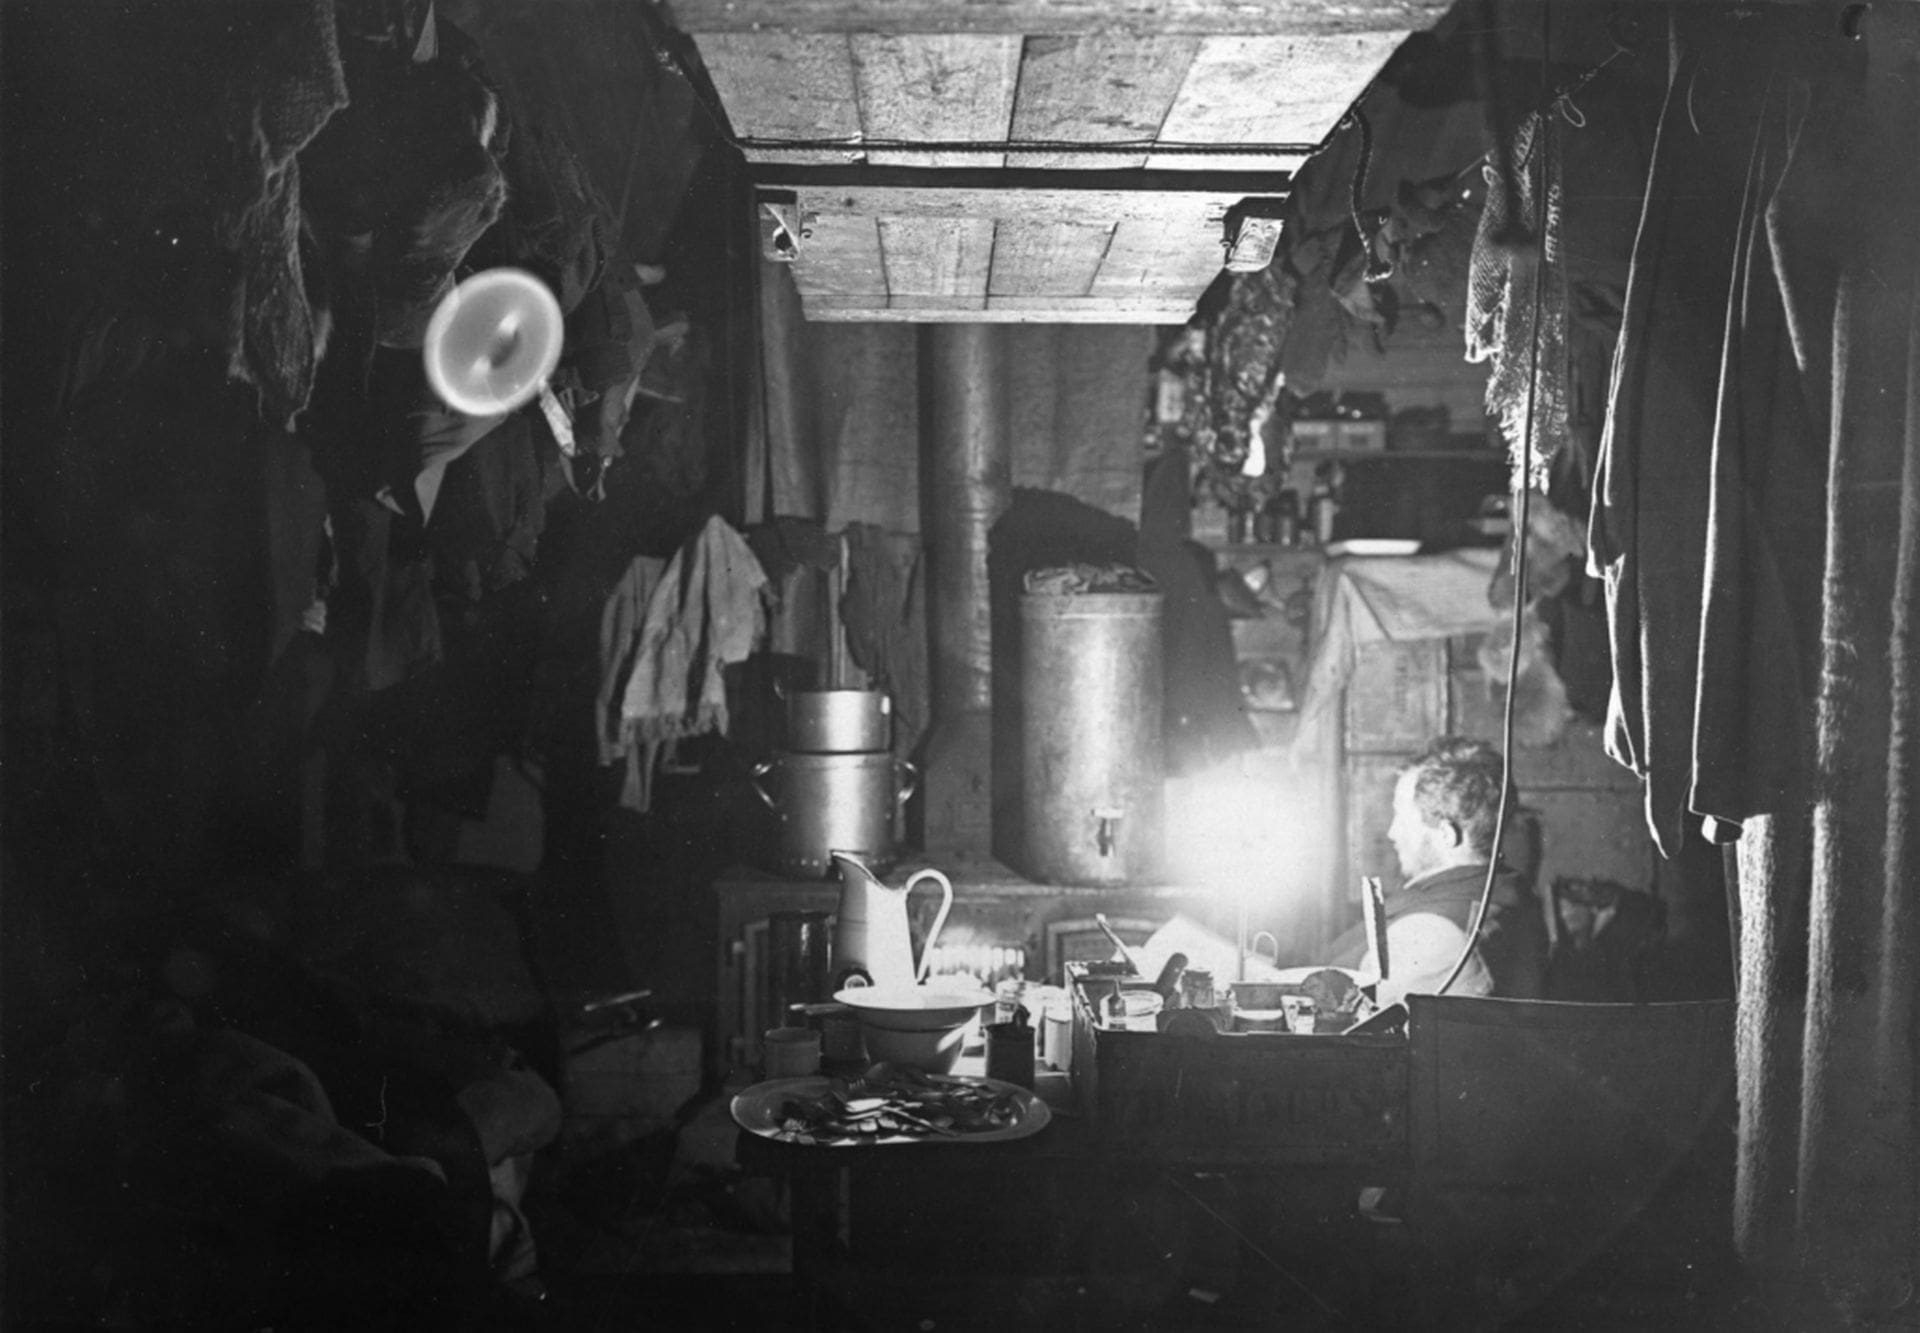 Douglas Mawson (1882-1958) on night watch in Shackleton's hut at Cape Royds, Ross Island, Antarctica, by an unknown photographer